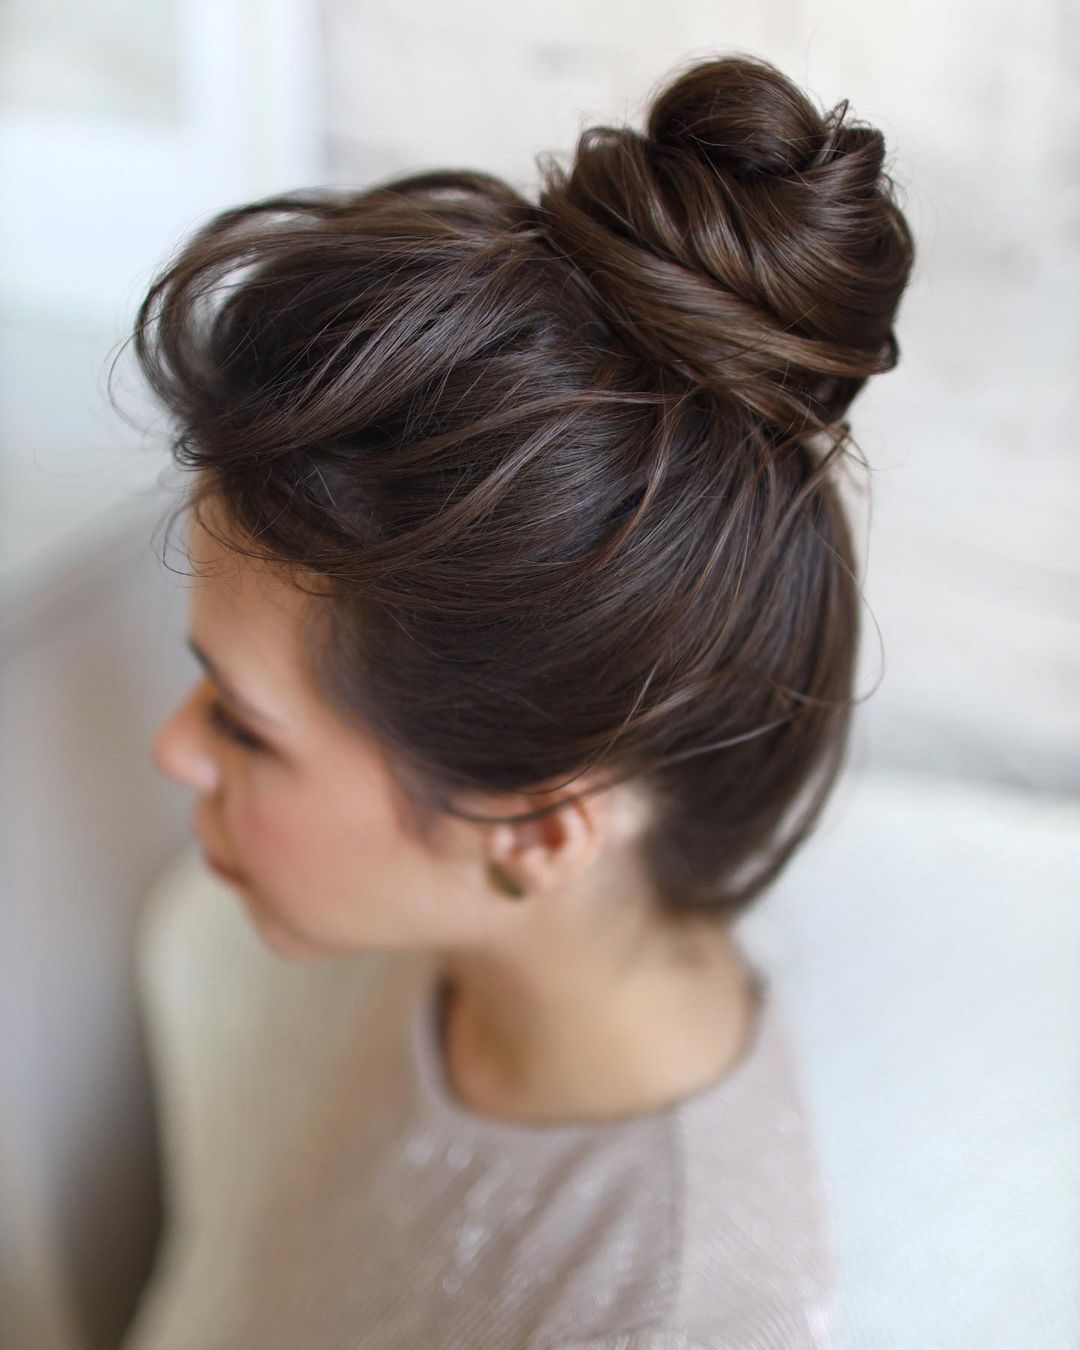 A bun in a hurry - the most trendy hairstyle of summer 2023